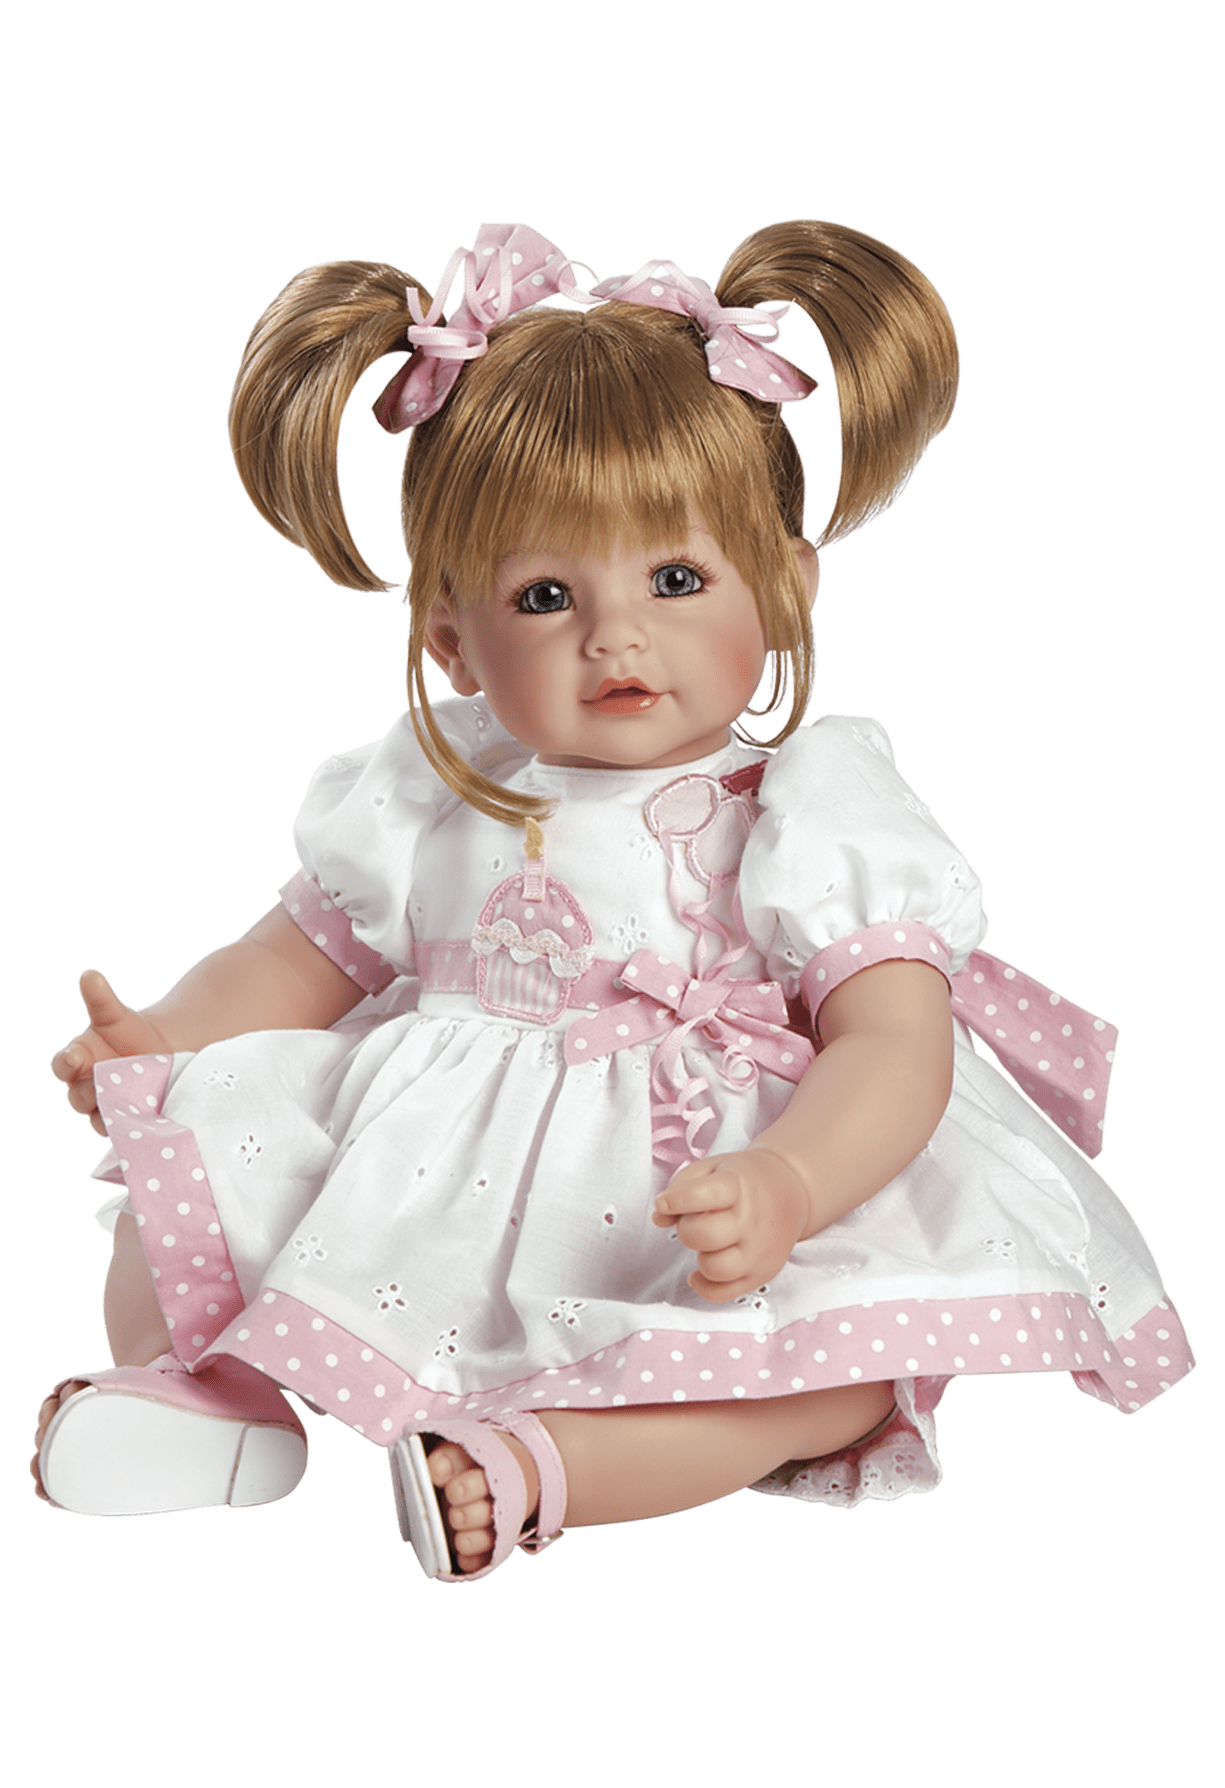 Baby Doll Background PNG Image